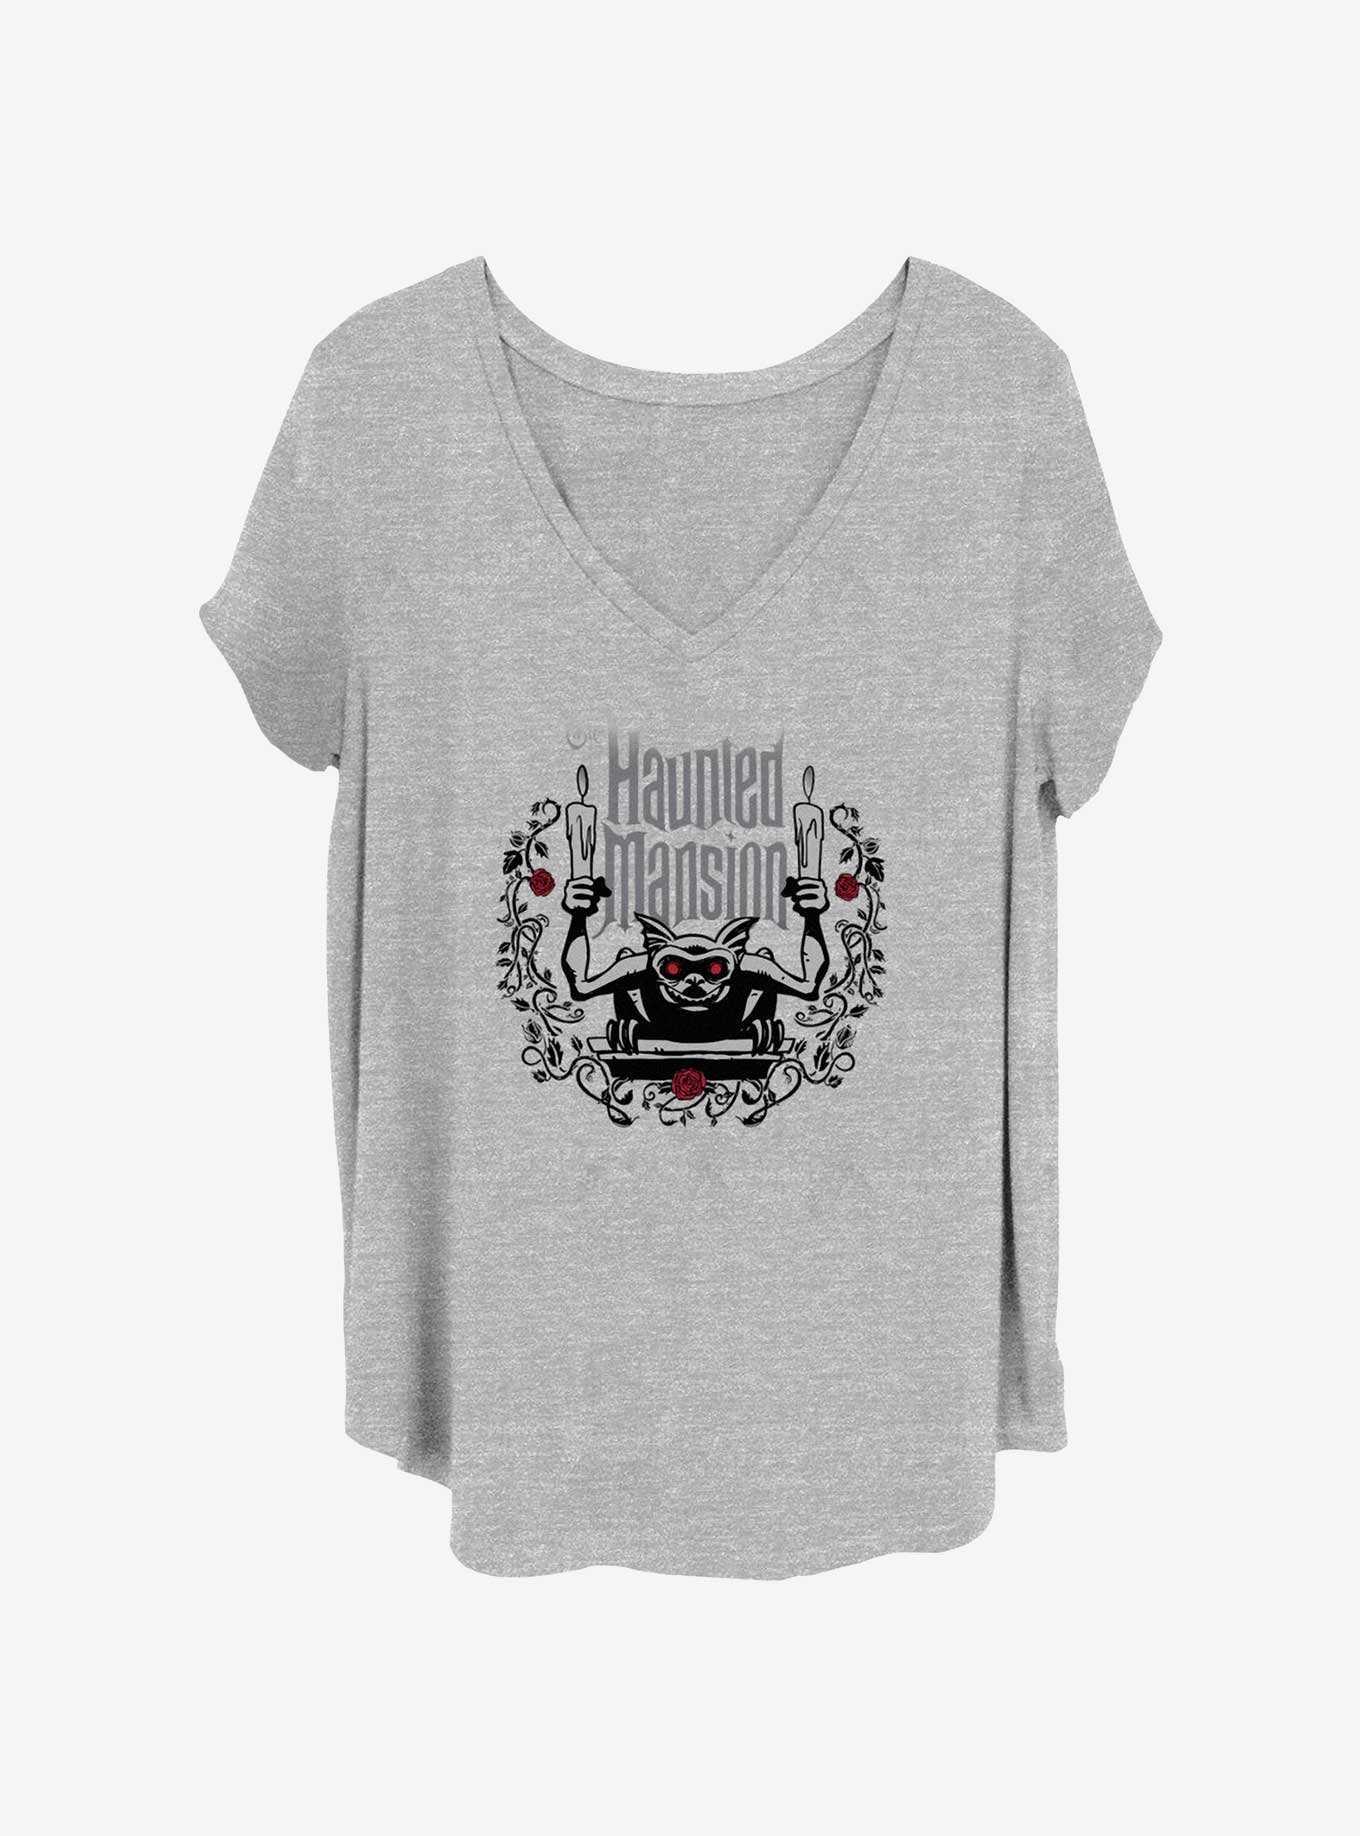 Disney The Haunted Mansion Gargoyle With Candles Girls T-Shirt Plus Size, , hi-res